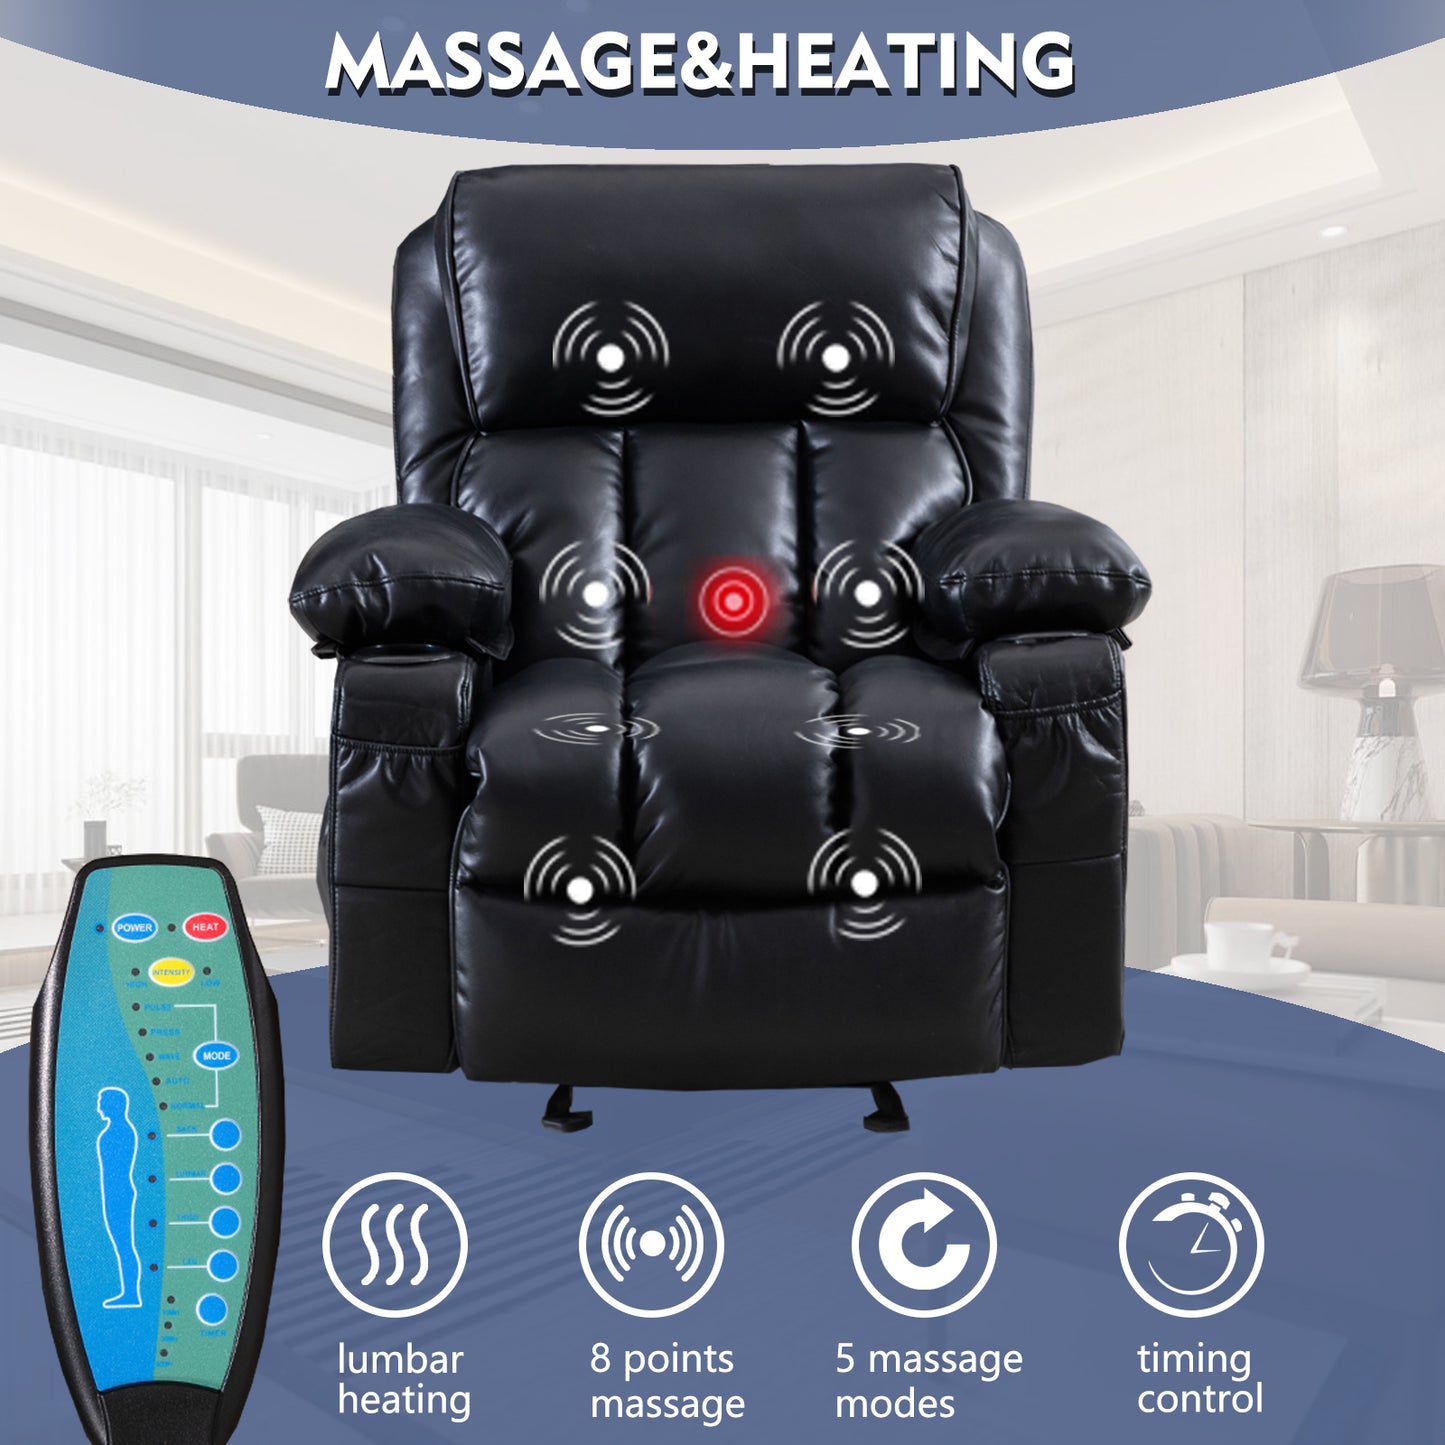 SYNGAR Manual Recliner Chair with Heat and Vibration Massage, Faux Leather Elderly Single Reclining Rocker Sofa with USB Charge Port, Cup Holders and Side Pocket for Bedroom Home Theater, Black